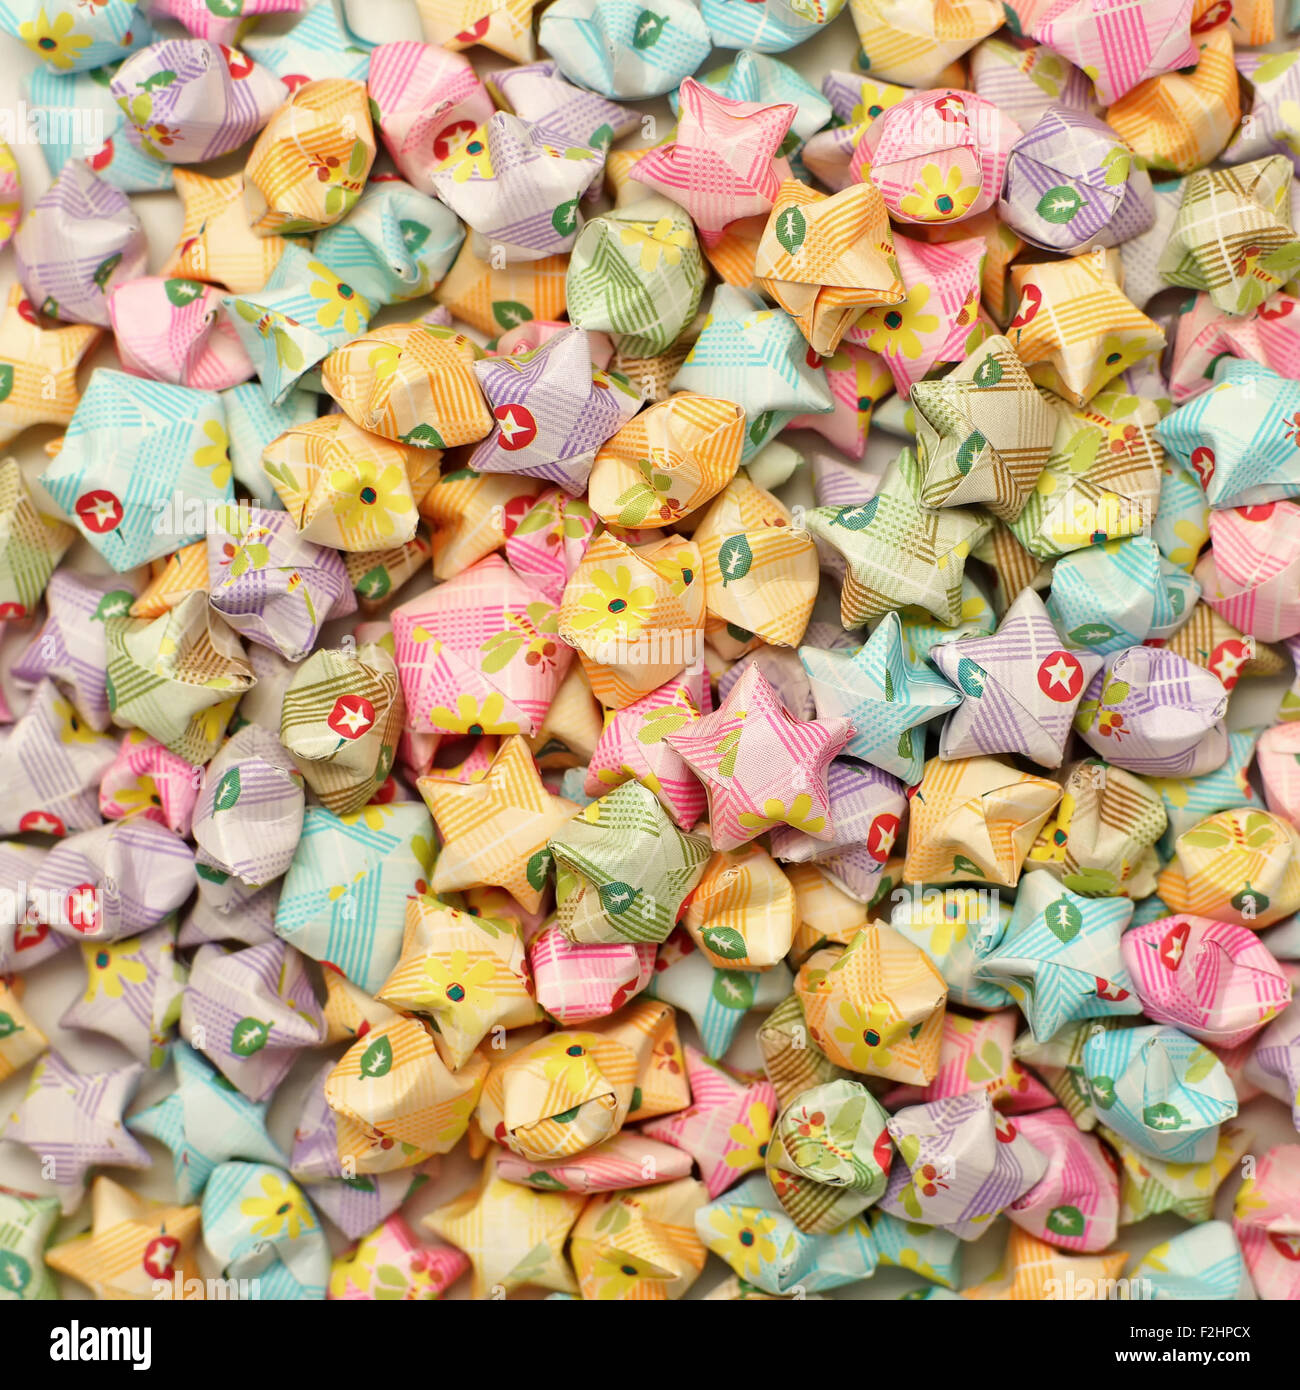 350+ Lucky Star Origami Paper Stock Photos, Pictures & Royalty